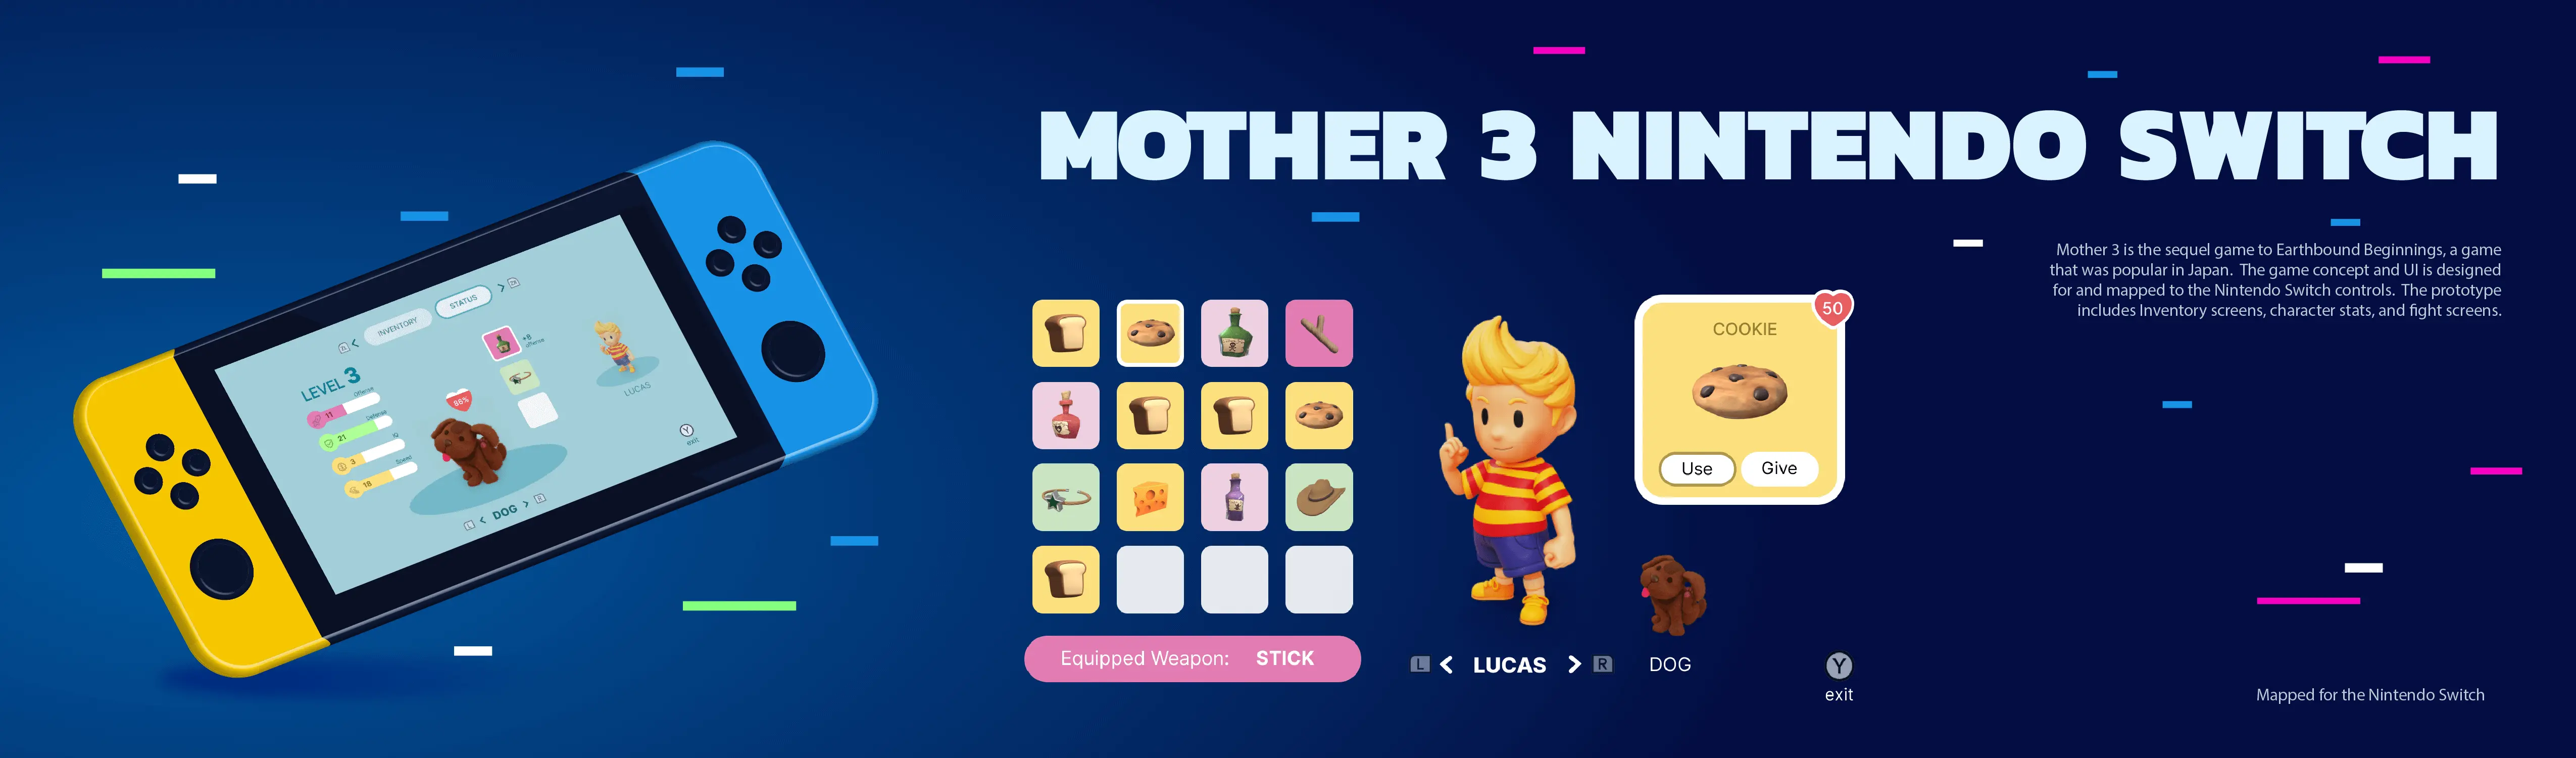 Mother 3 Banner Image